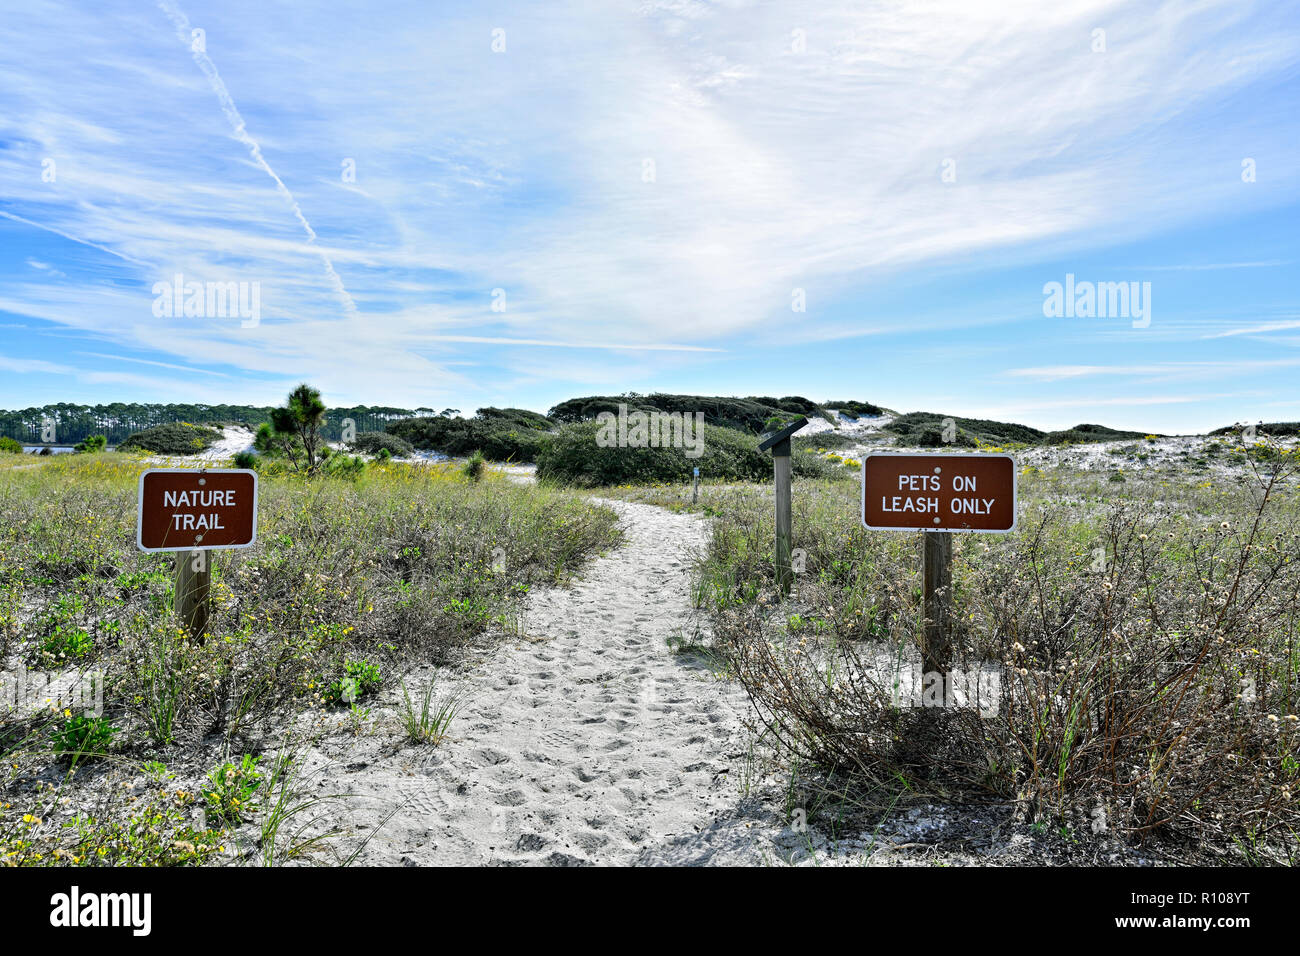 Head of nature trail or walking trail through the white sand dunes of Deer Lake State Park, Florida USA, on the Florida Gulf coast panhandle. Stock Photo